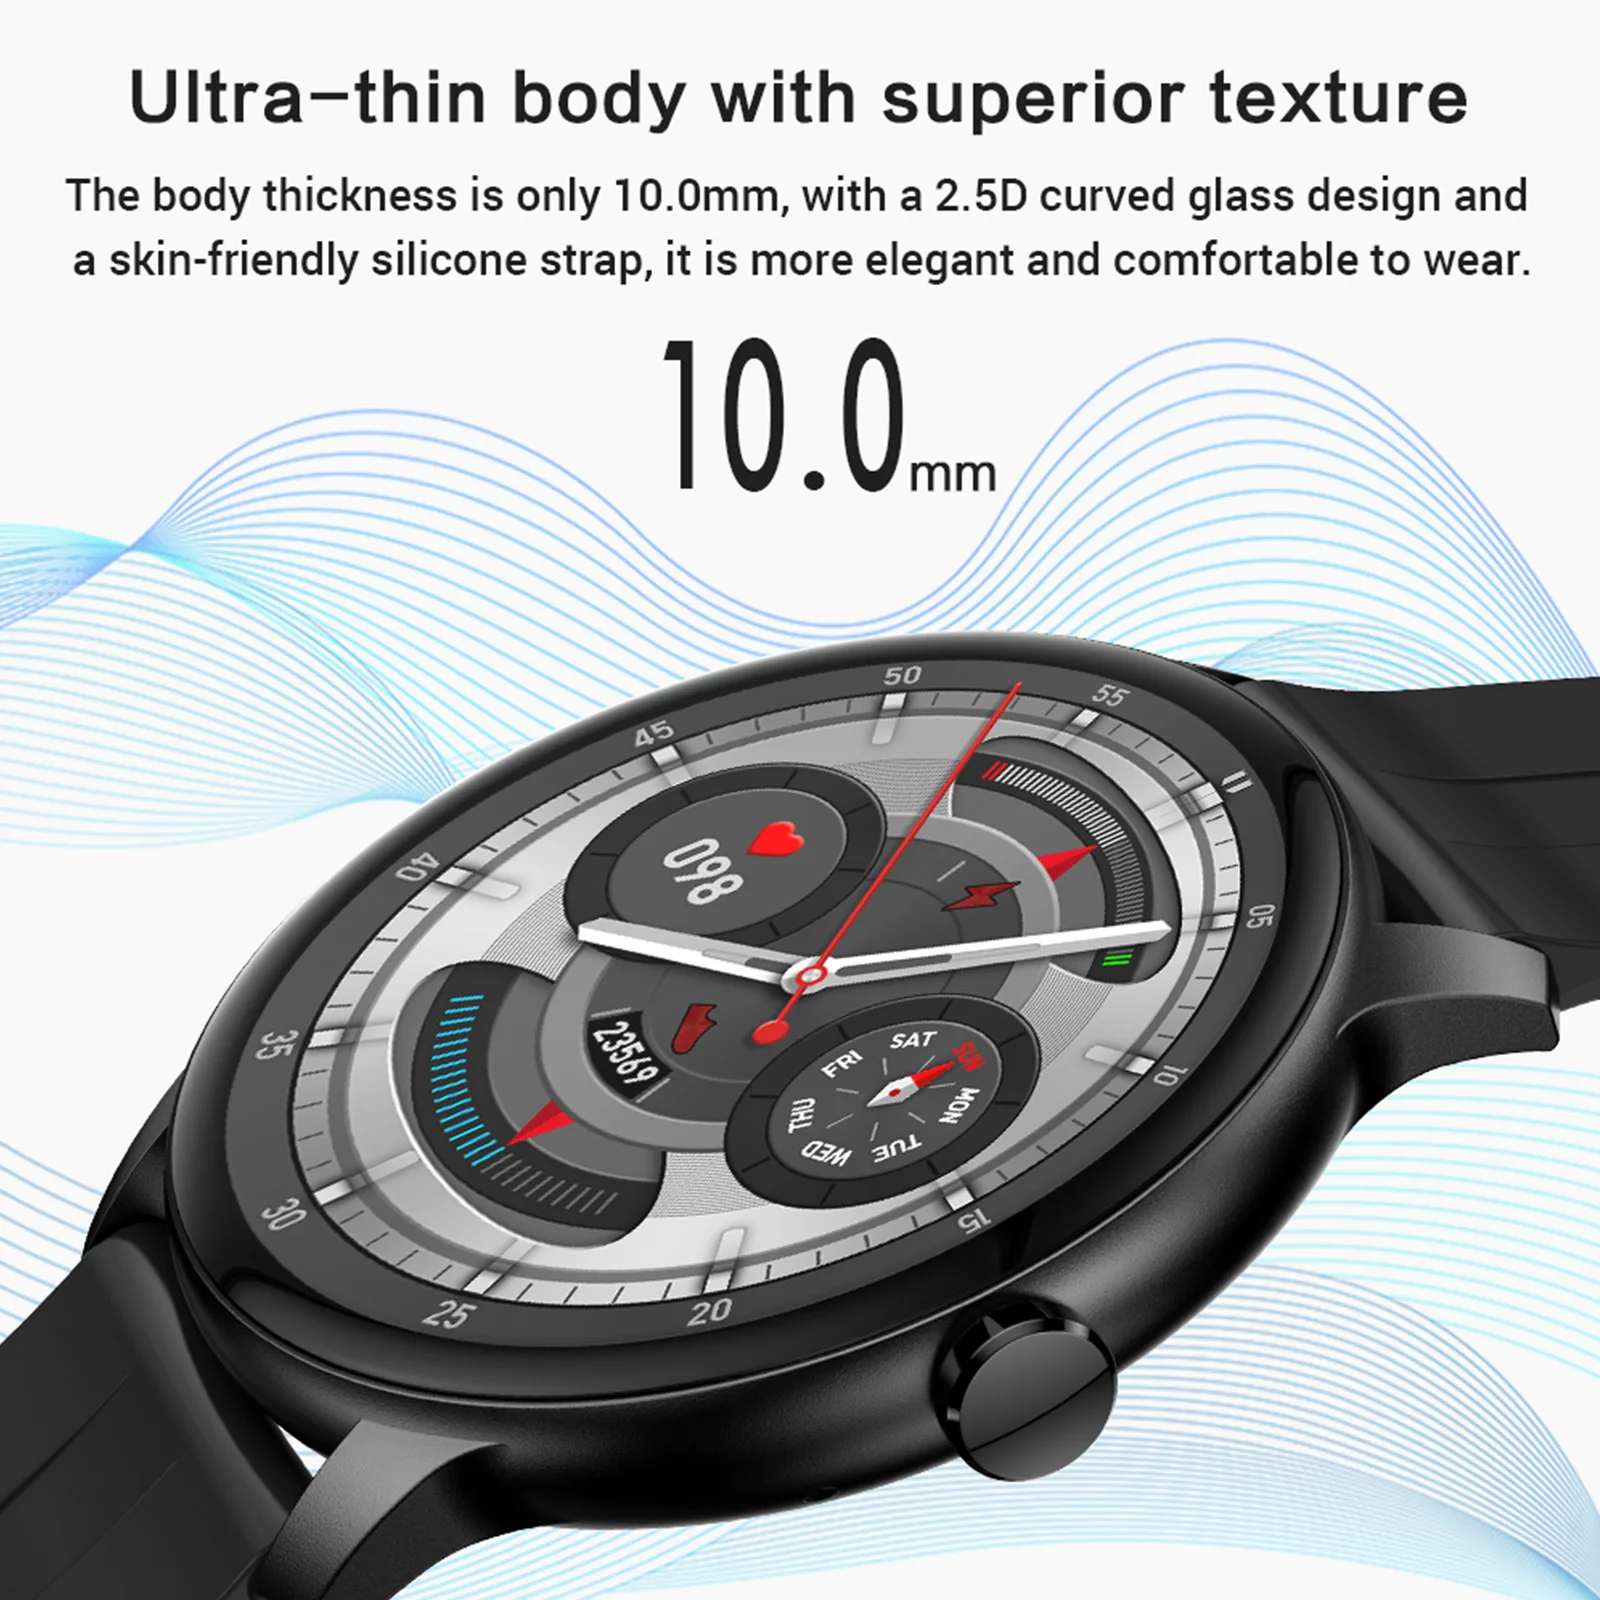 Z2 Smart Sports Watch 10mm Ultra-thin Body BT Dial-up Call Health Monitoring Multiple Sports Mode Custom Dial Smartwatch